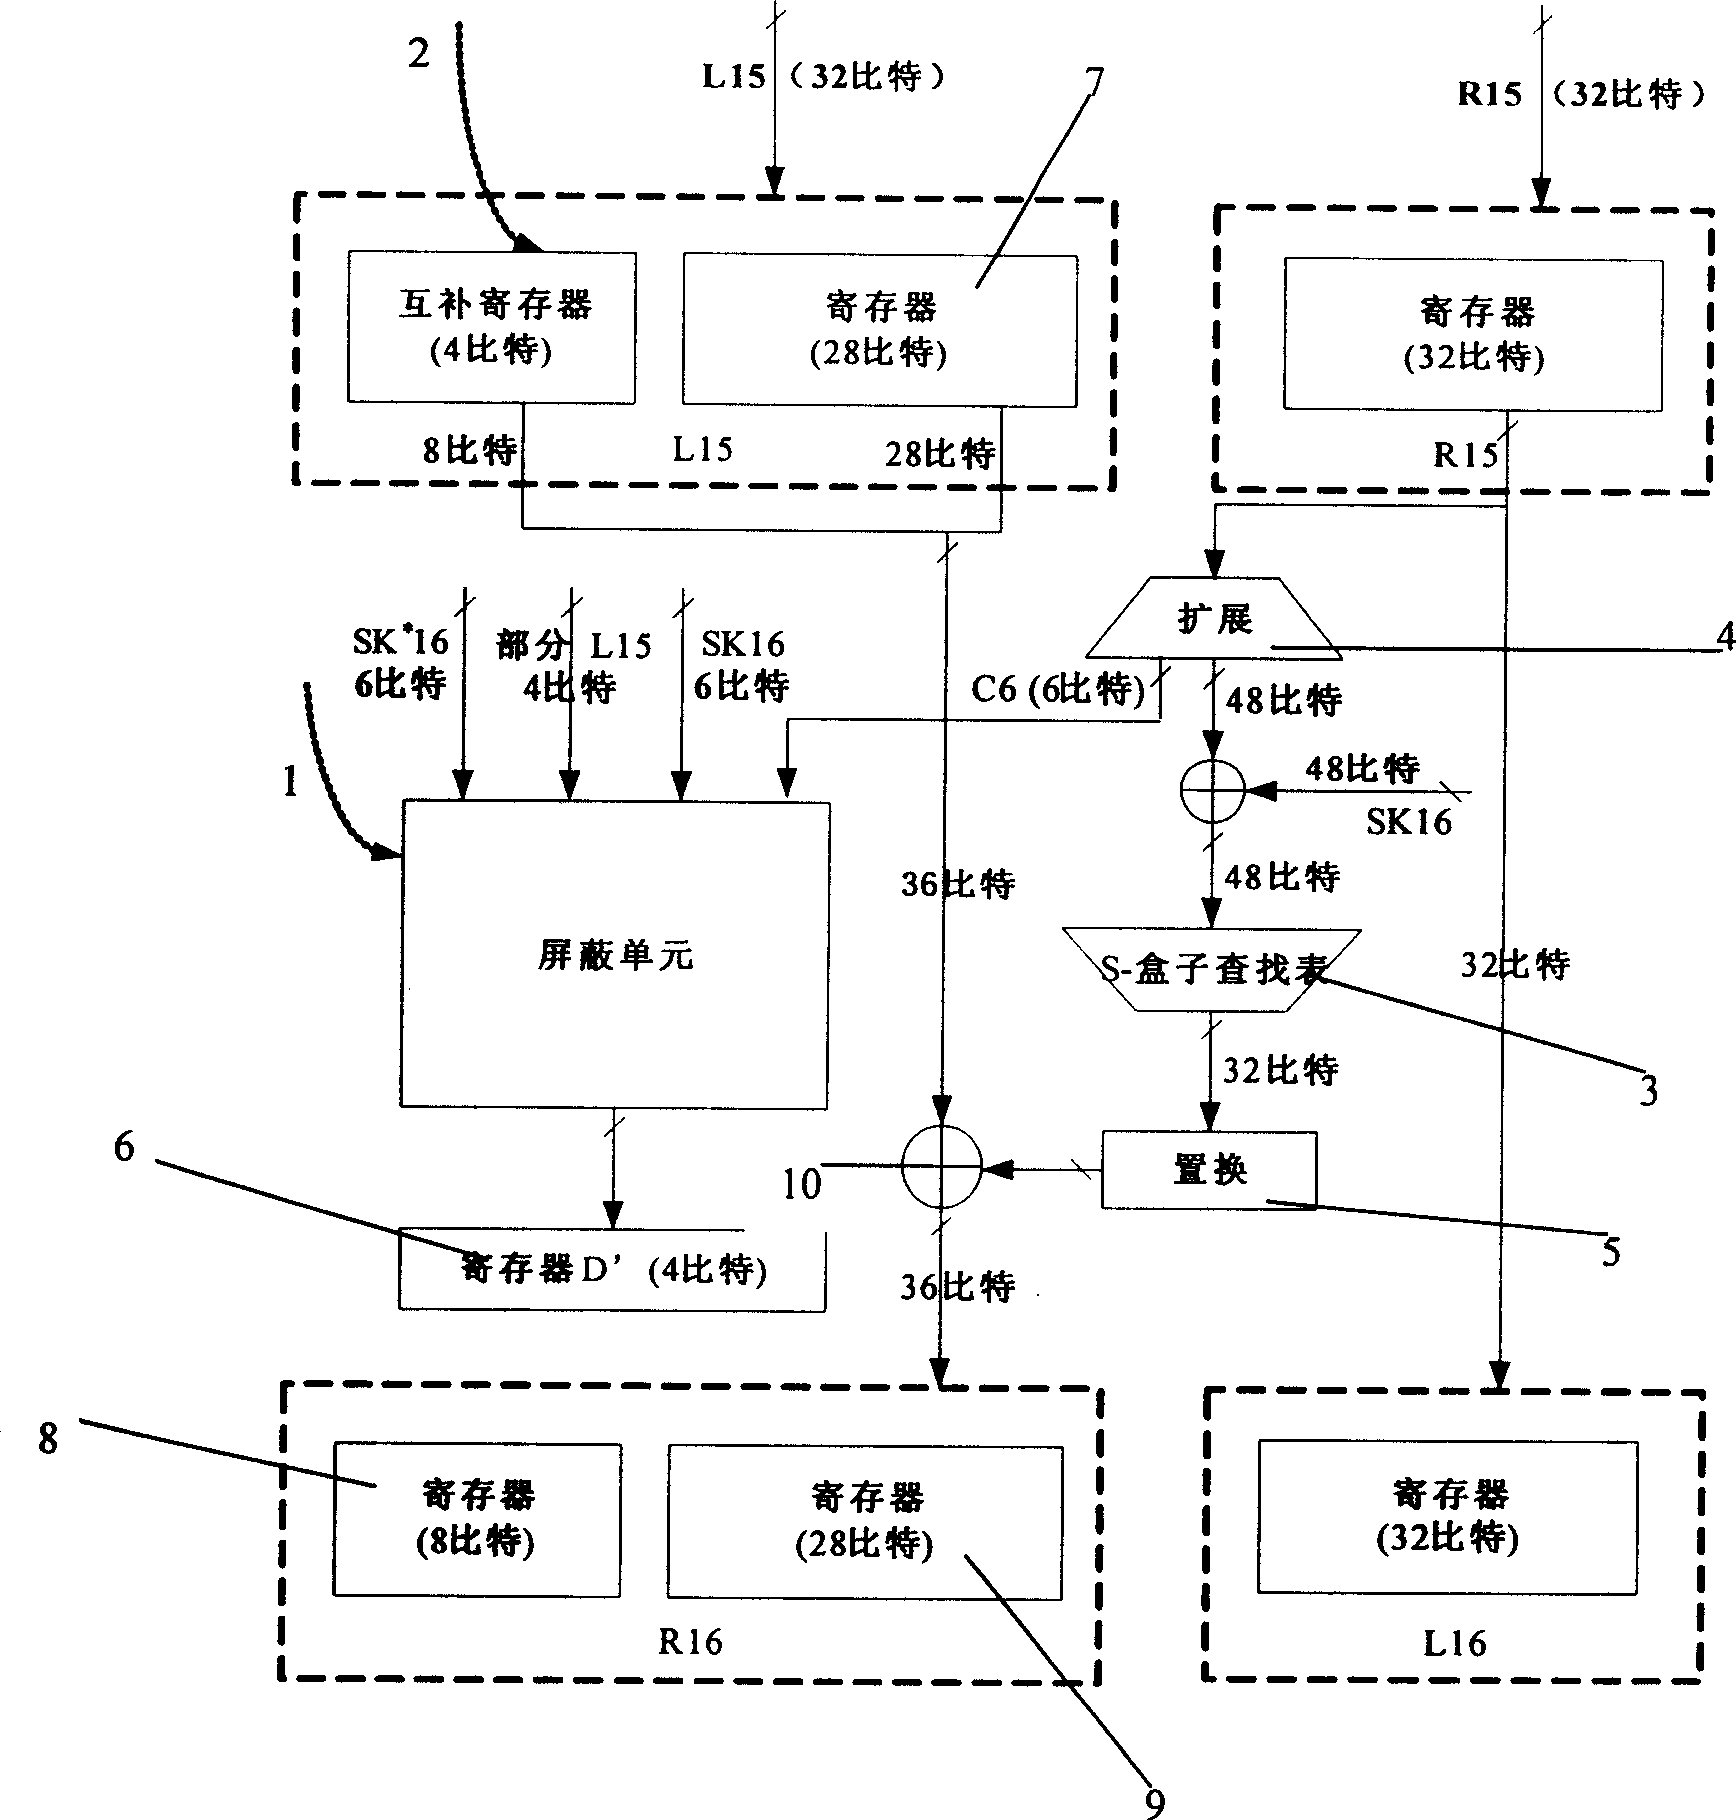 Differential power consumption analysis shield circuit for DES encrypted chip